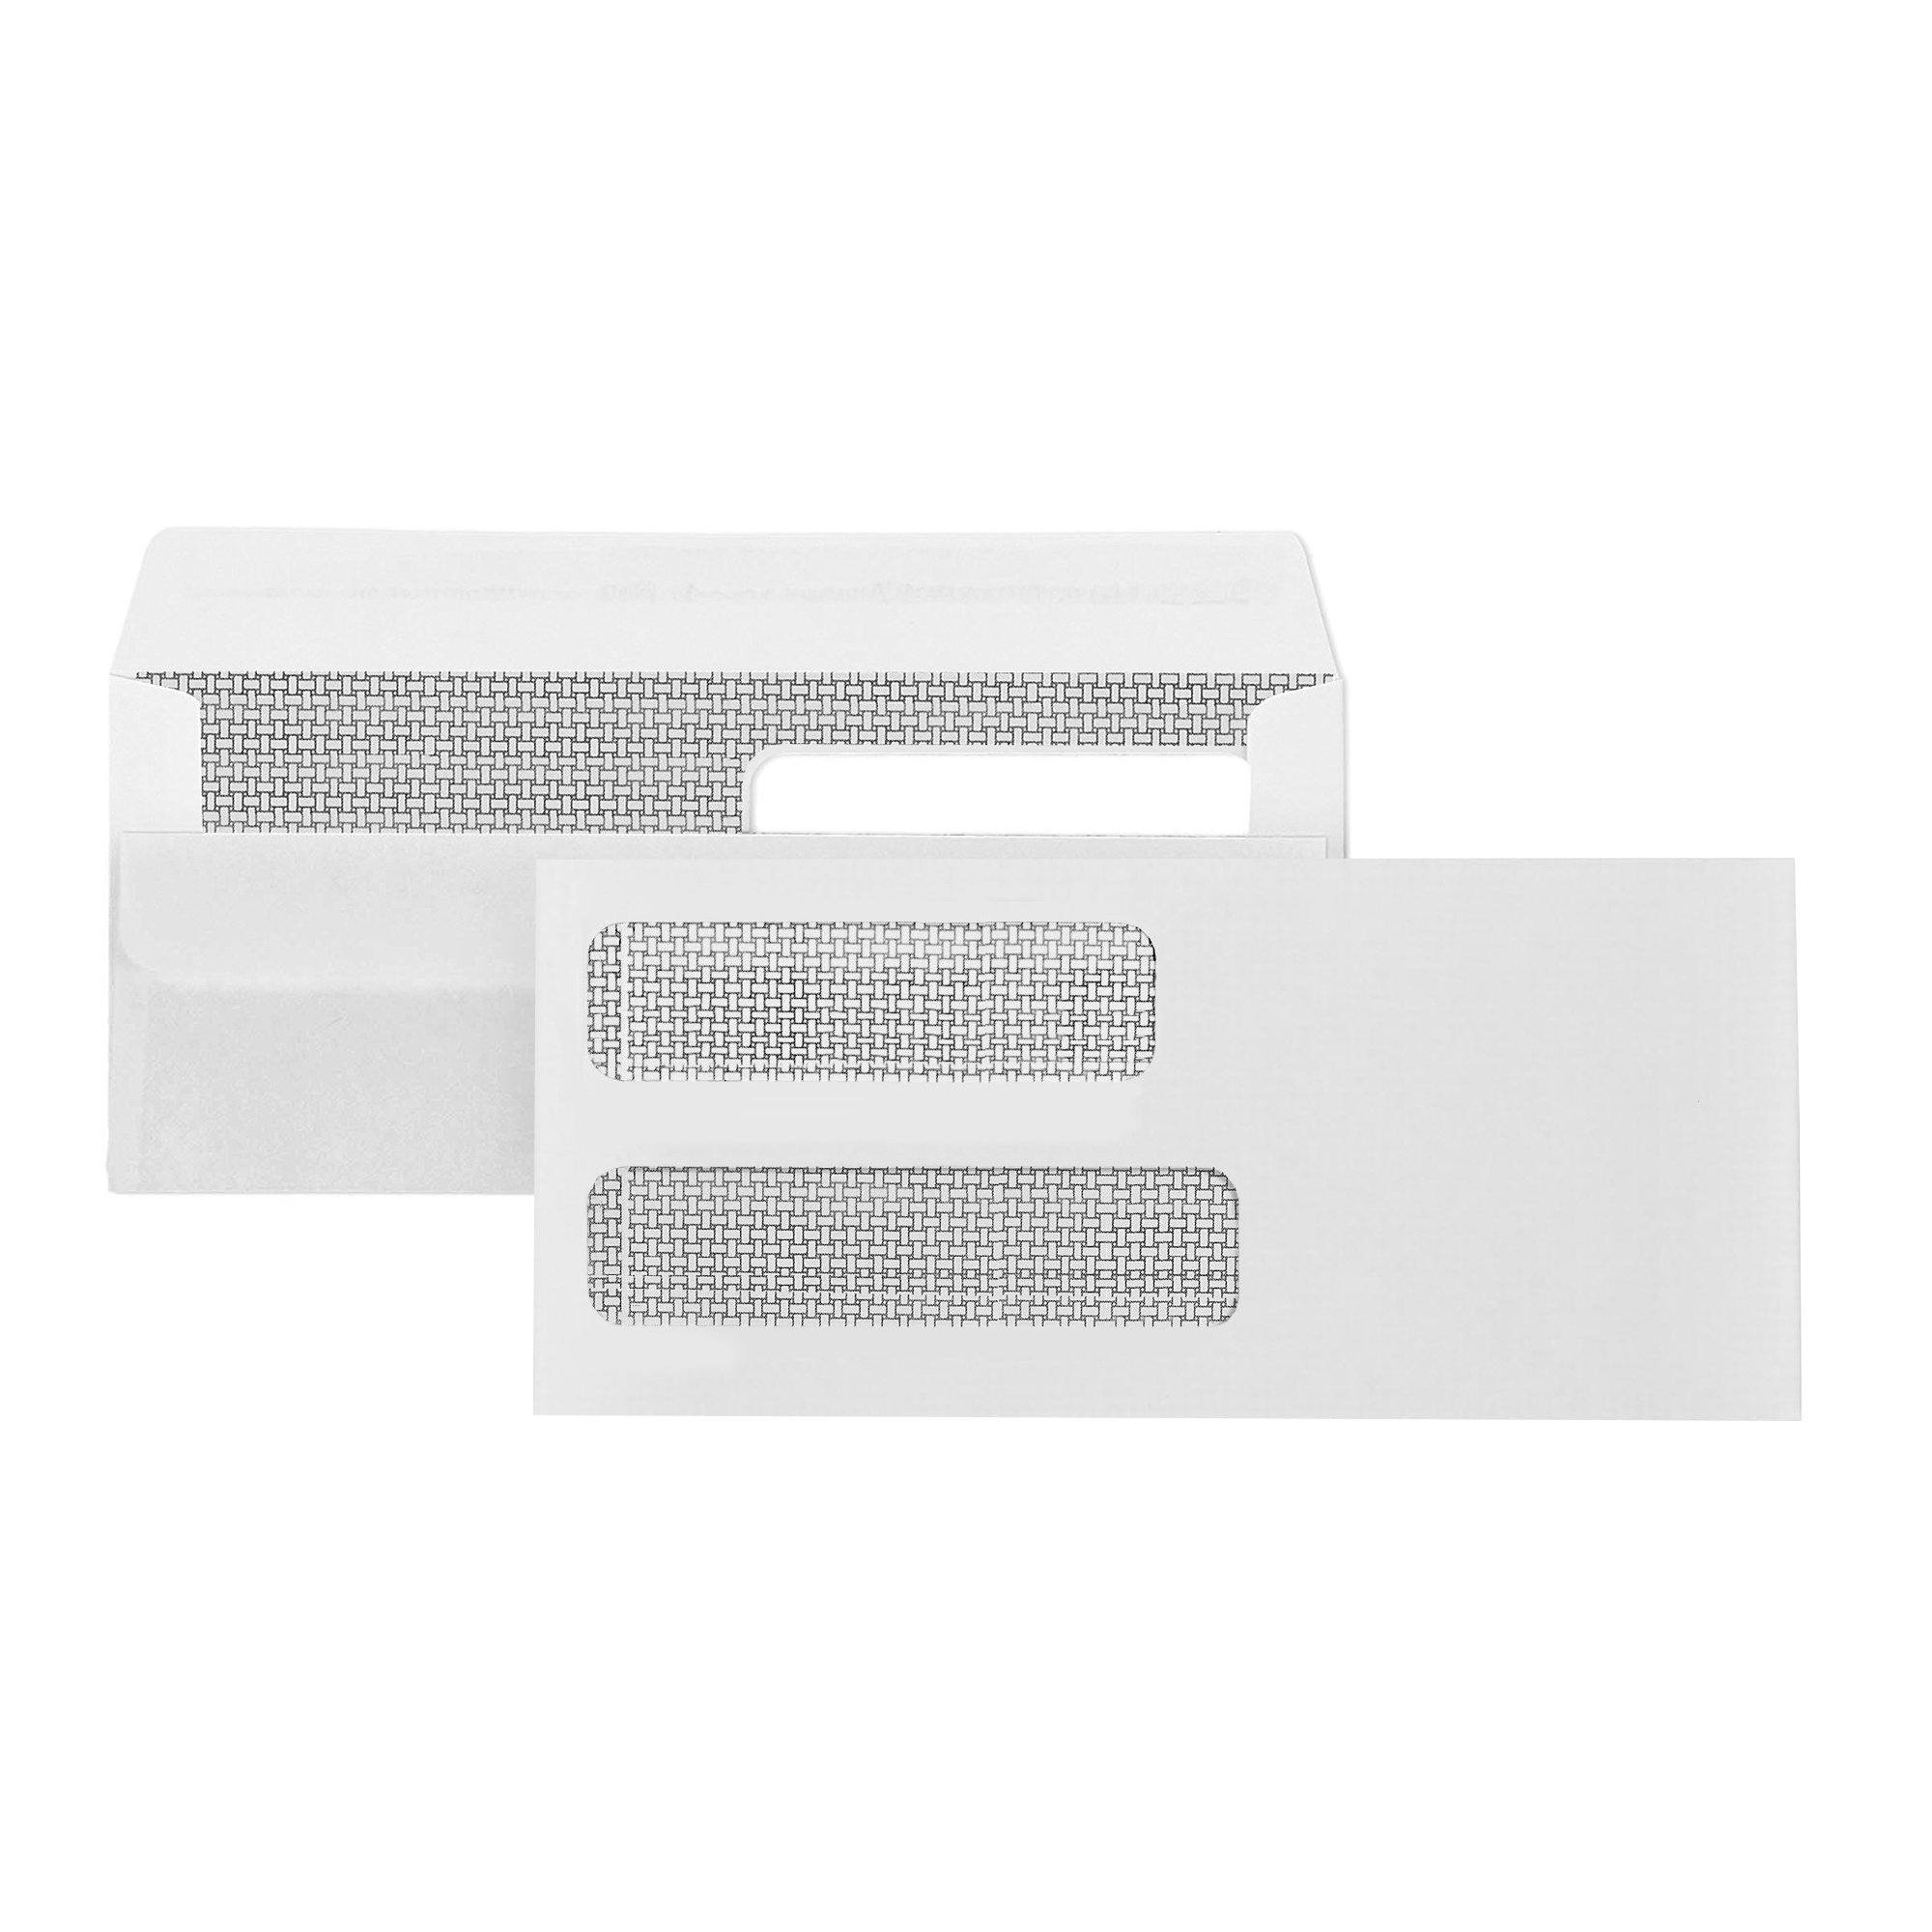 Envelope Templates Commercial Window Envelope Template Wsel